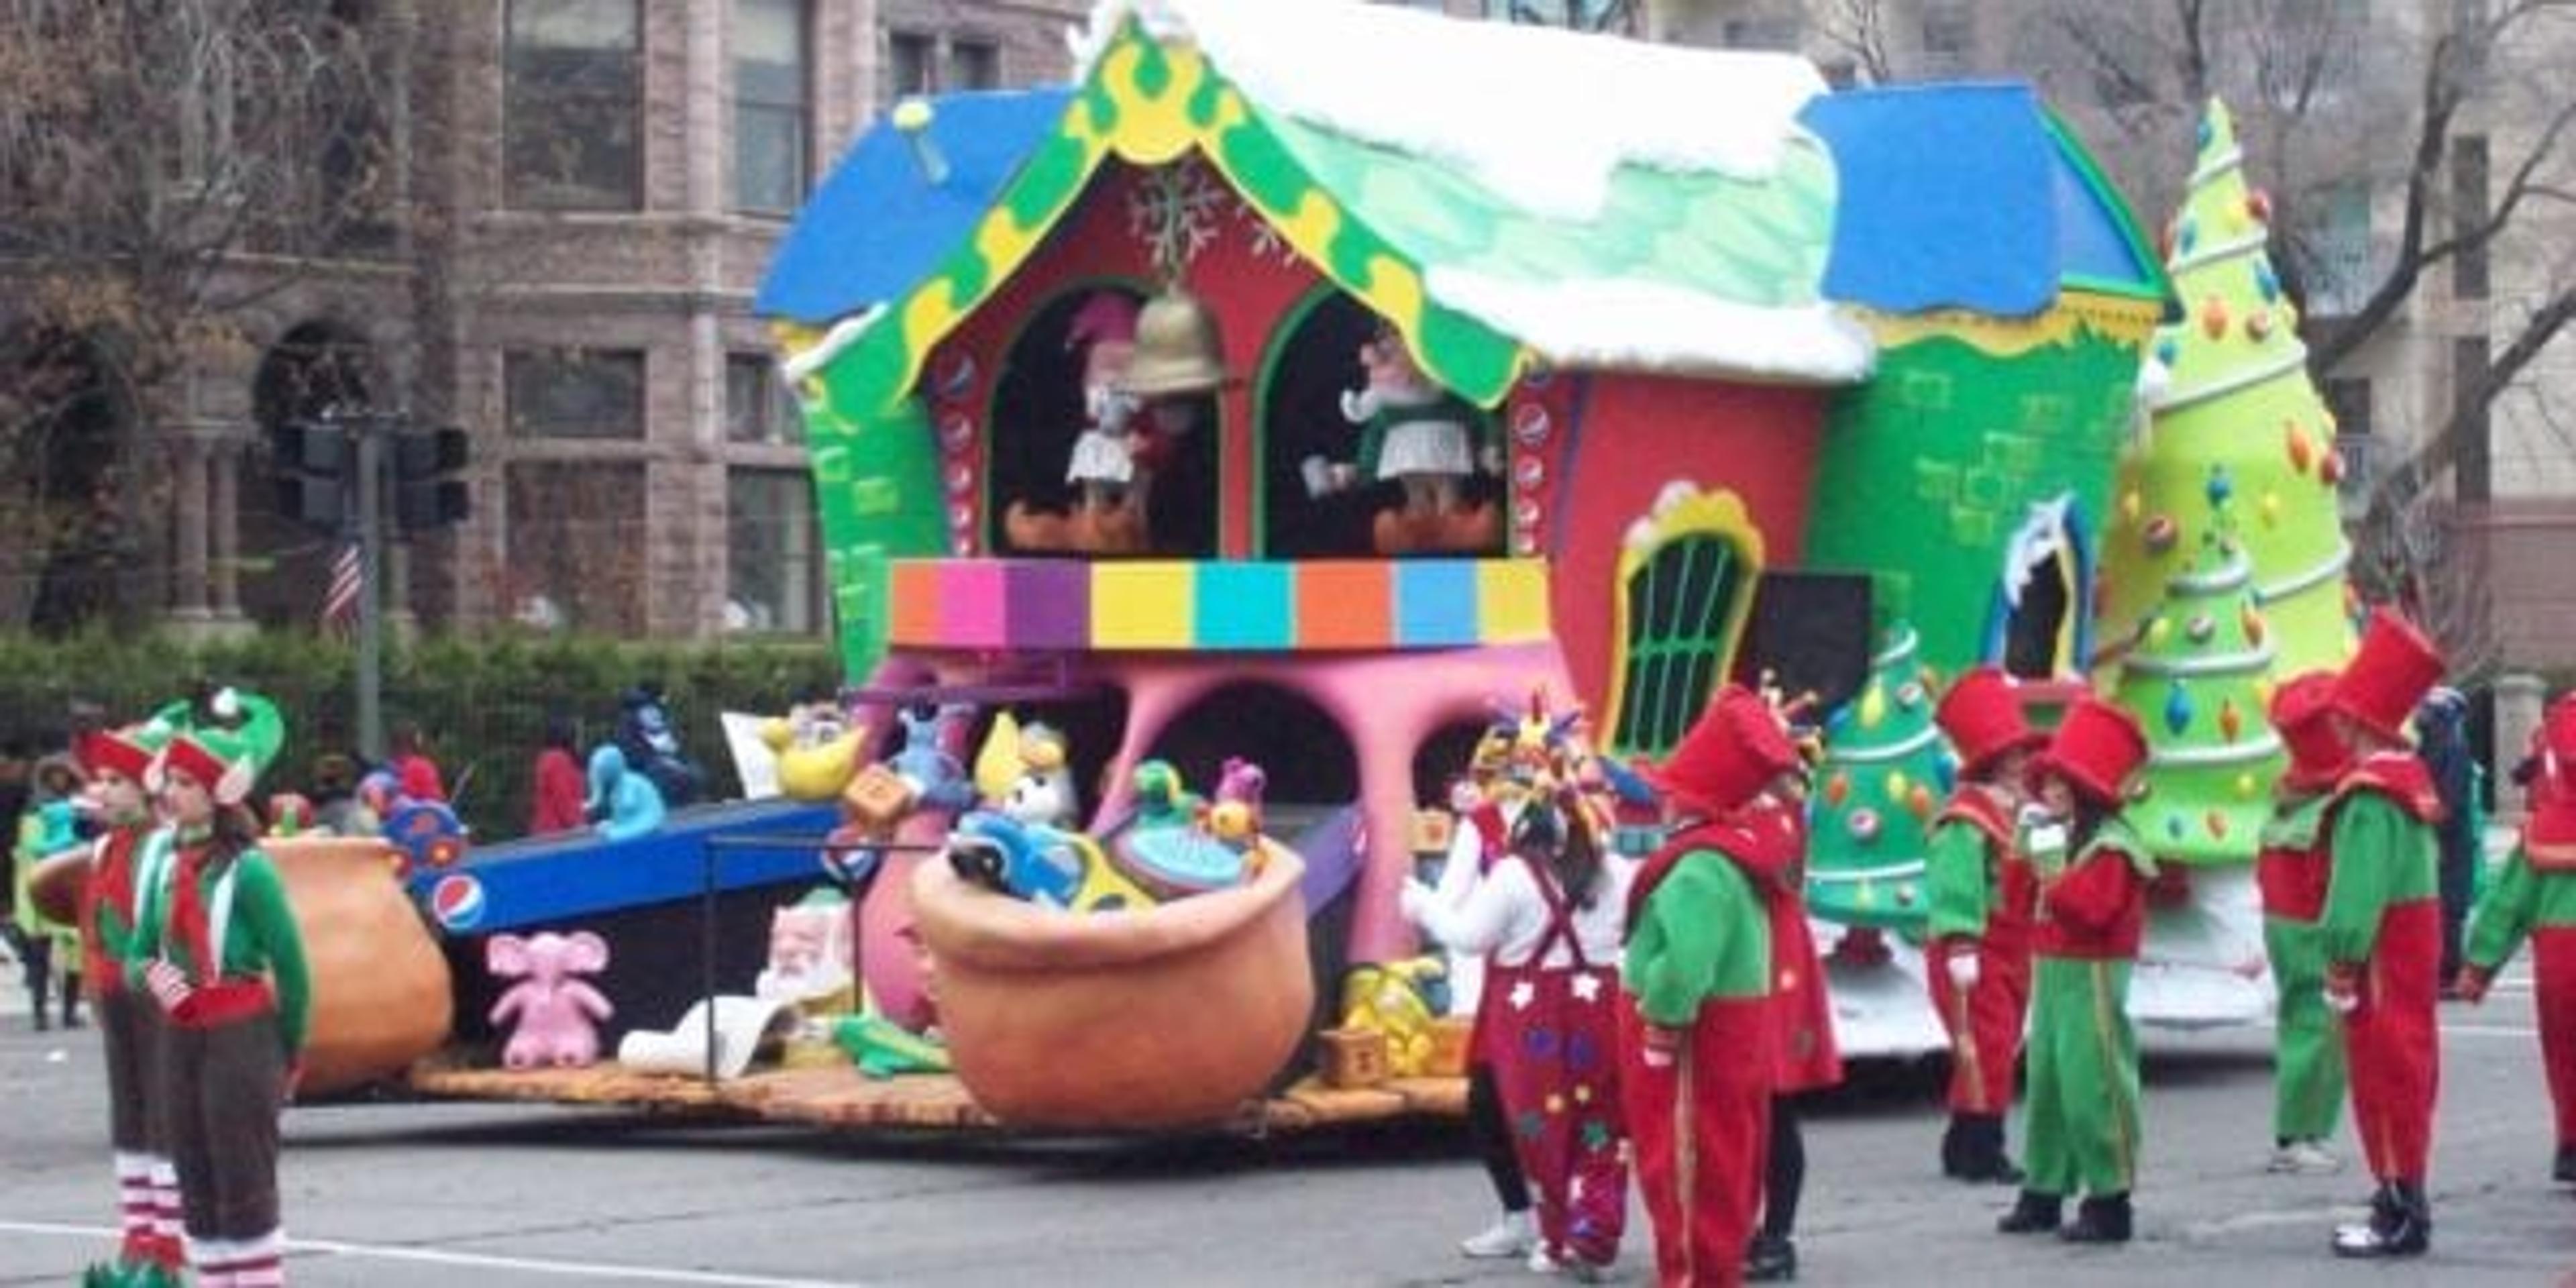 Toy Shop float with people dressed as elves at Thanksgiving Parade